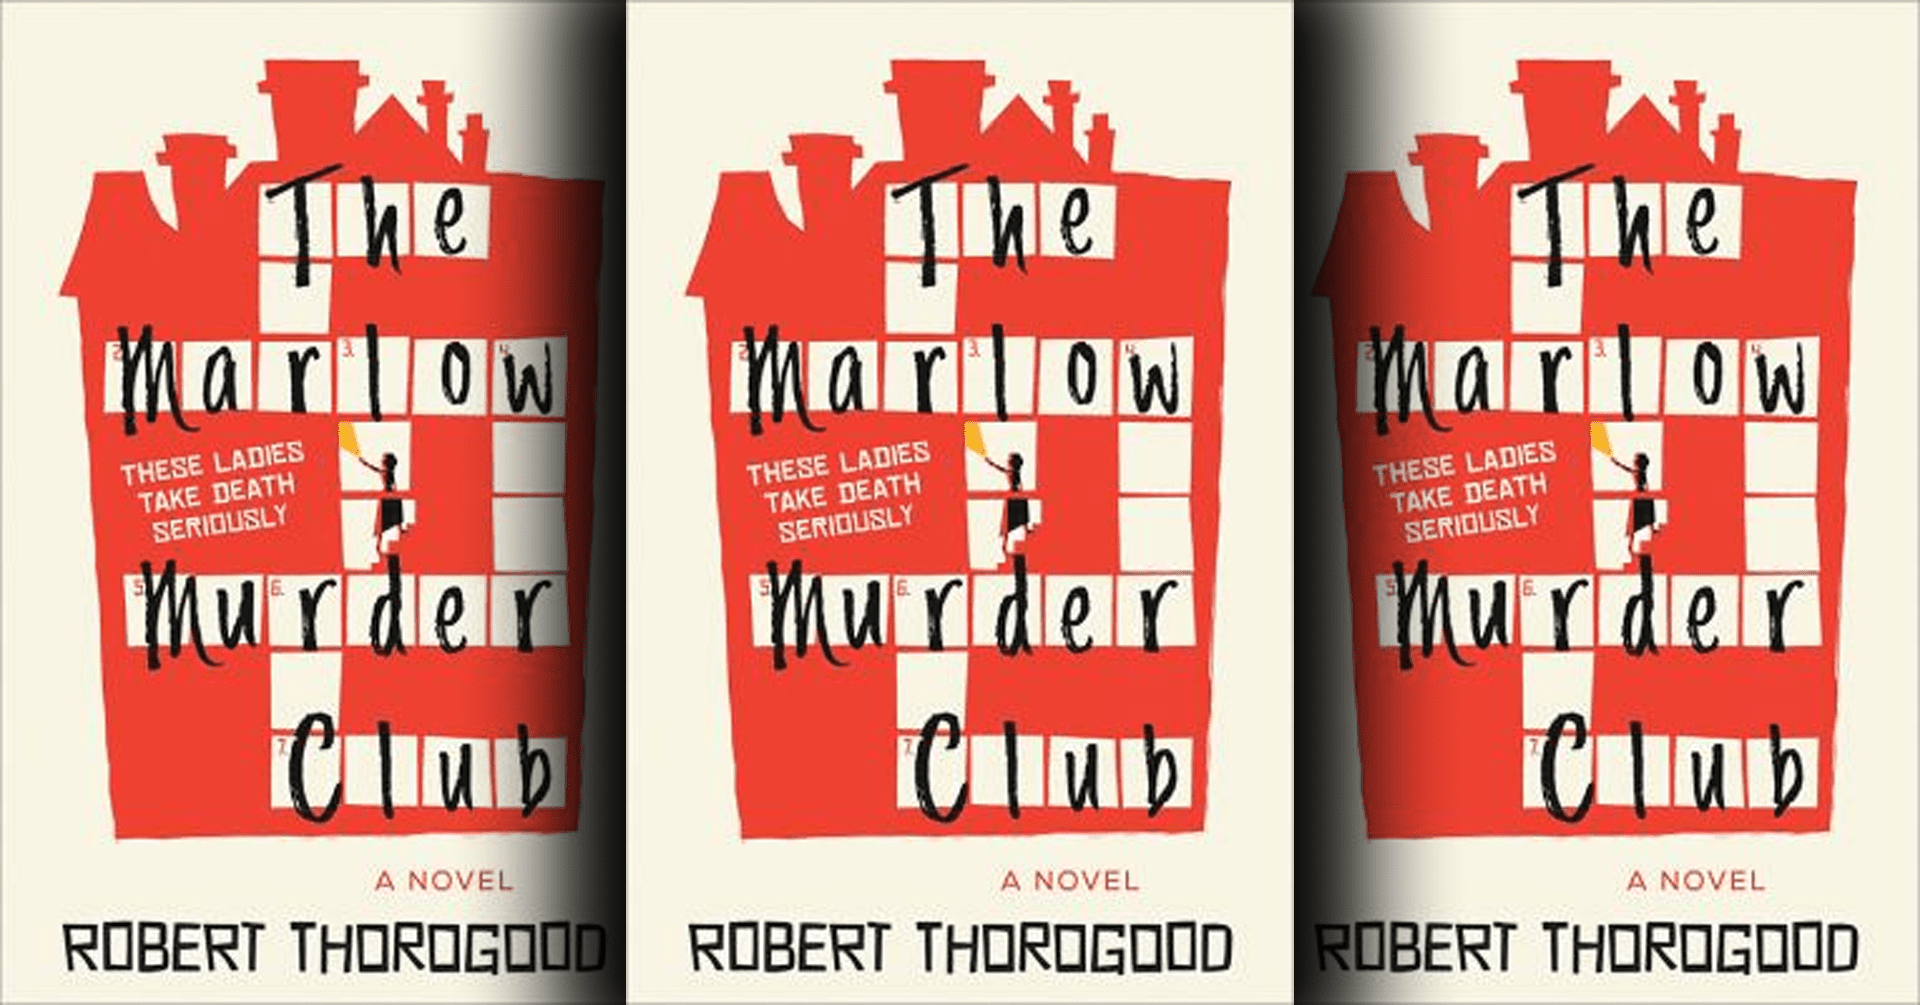 The Marlow Murder Club by Robert Thorogood (book cover)